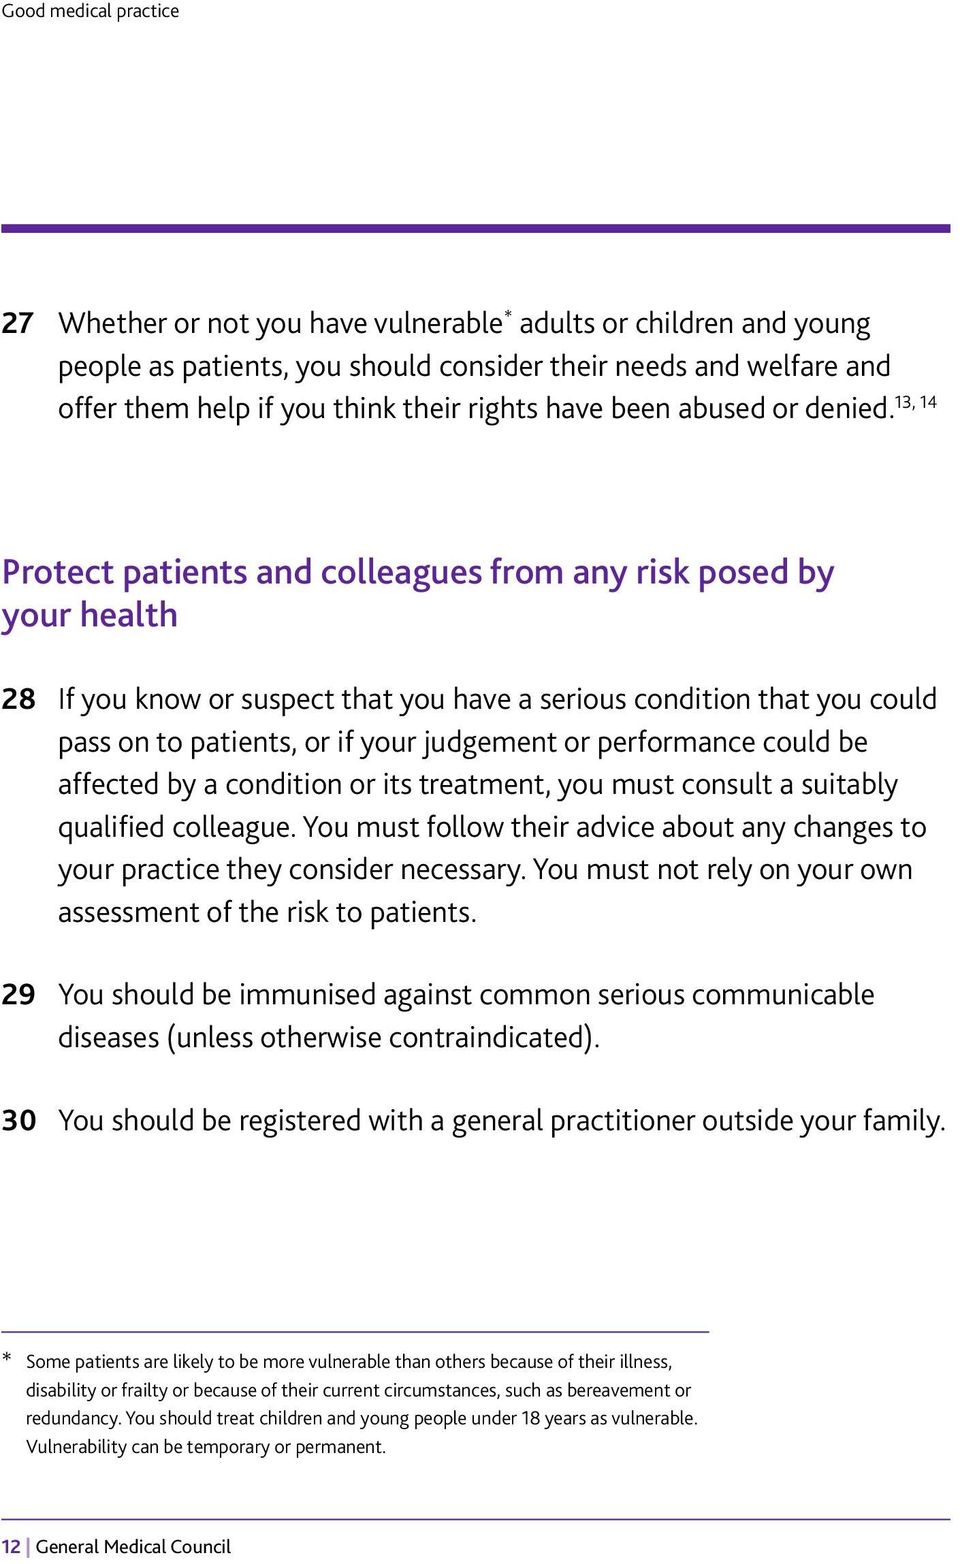 Protect patients and colleagues from any risk posed by your health 28 If you know or suspect that you have a serious condition that you could pass on to patients, or if your judgement or performance